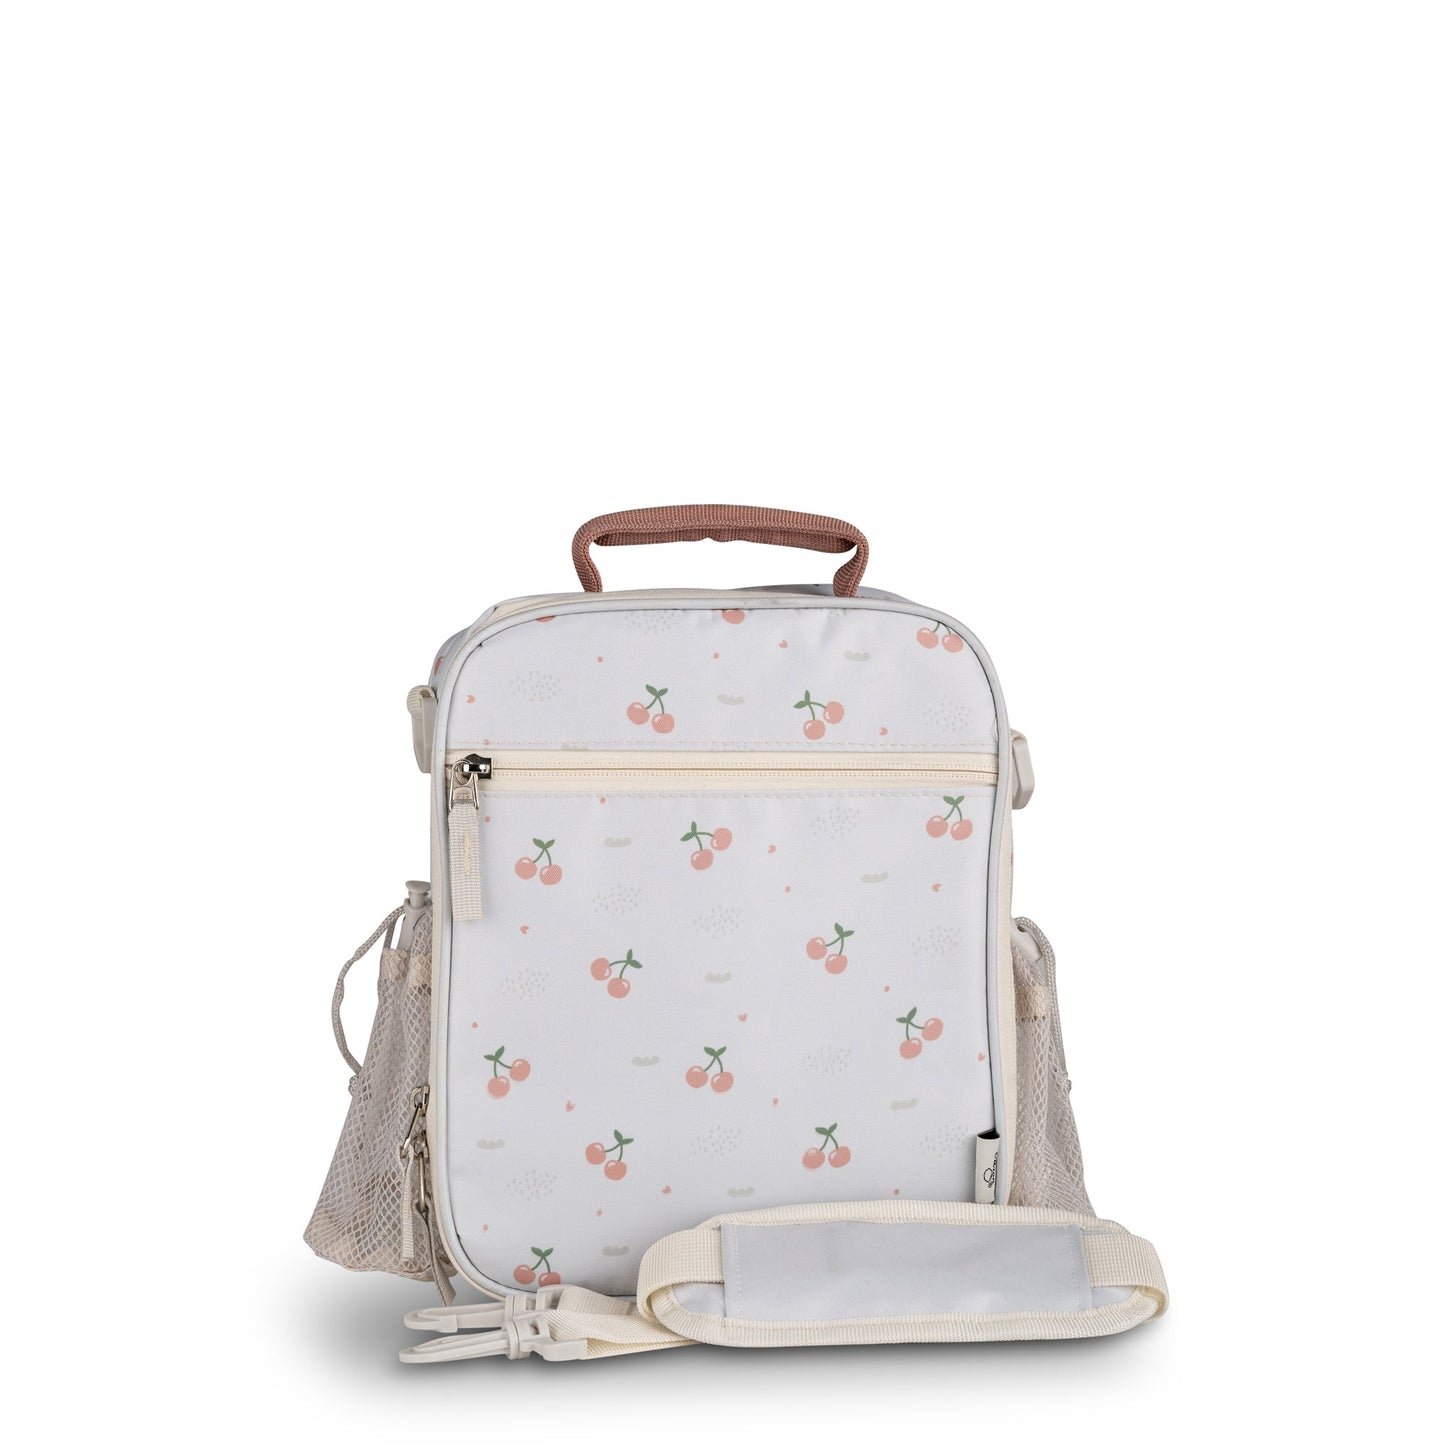 Insulated Lunch Bag Backpack - Cherry